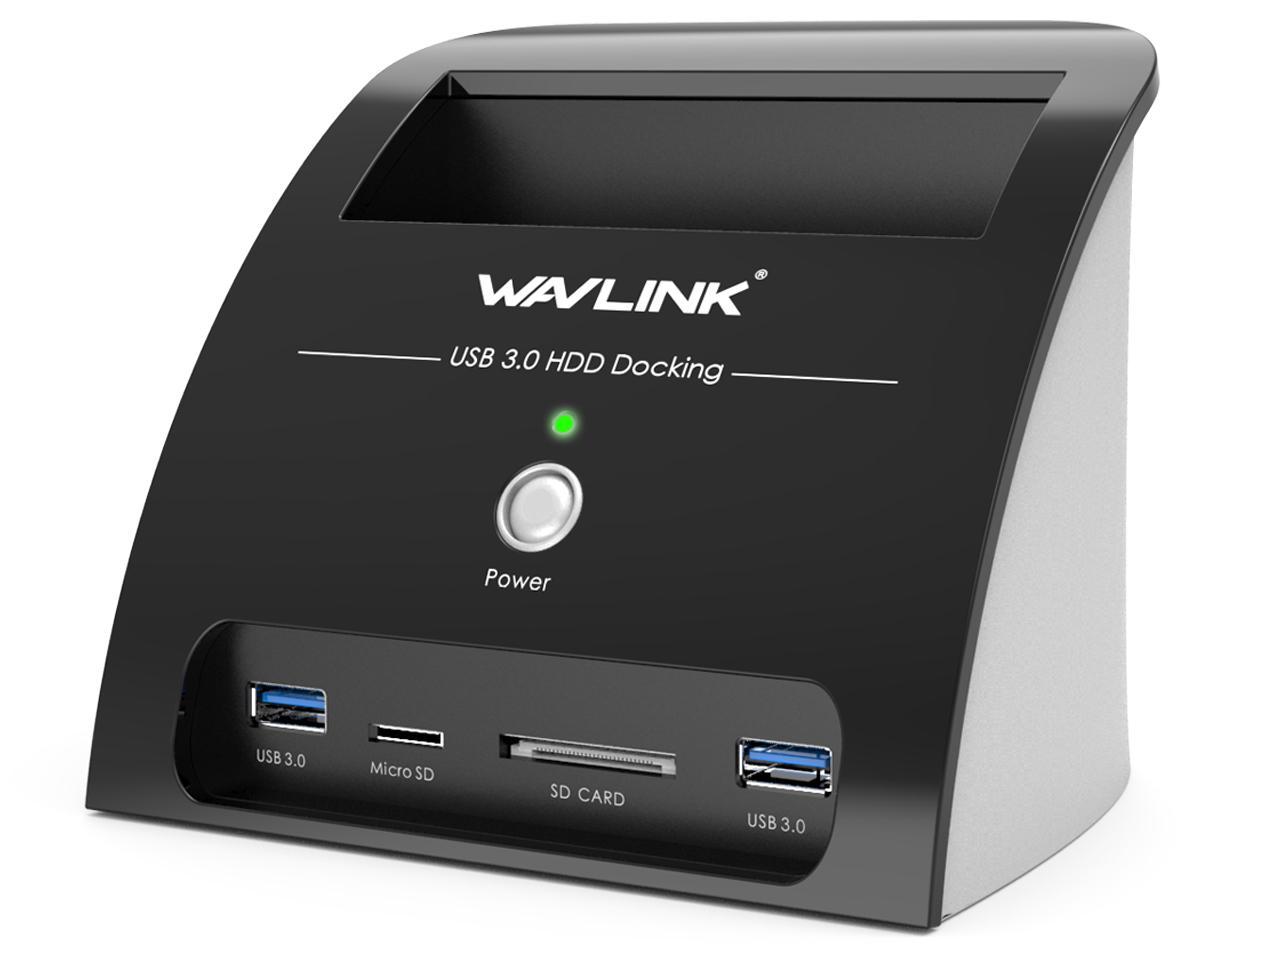 Troubleshooting Wavlink HDD Docking Station: Issues With Reading New SSDs